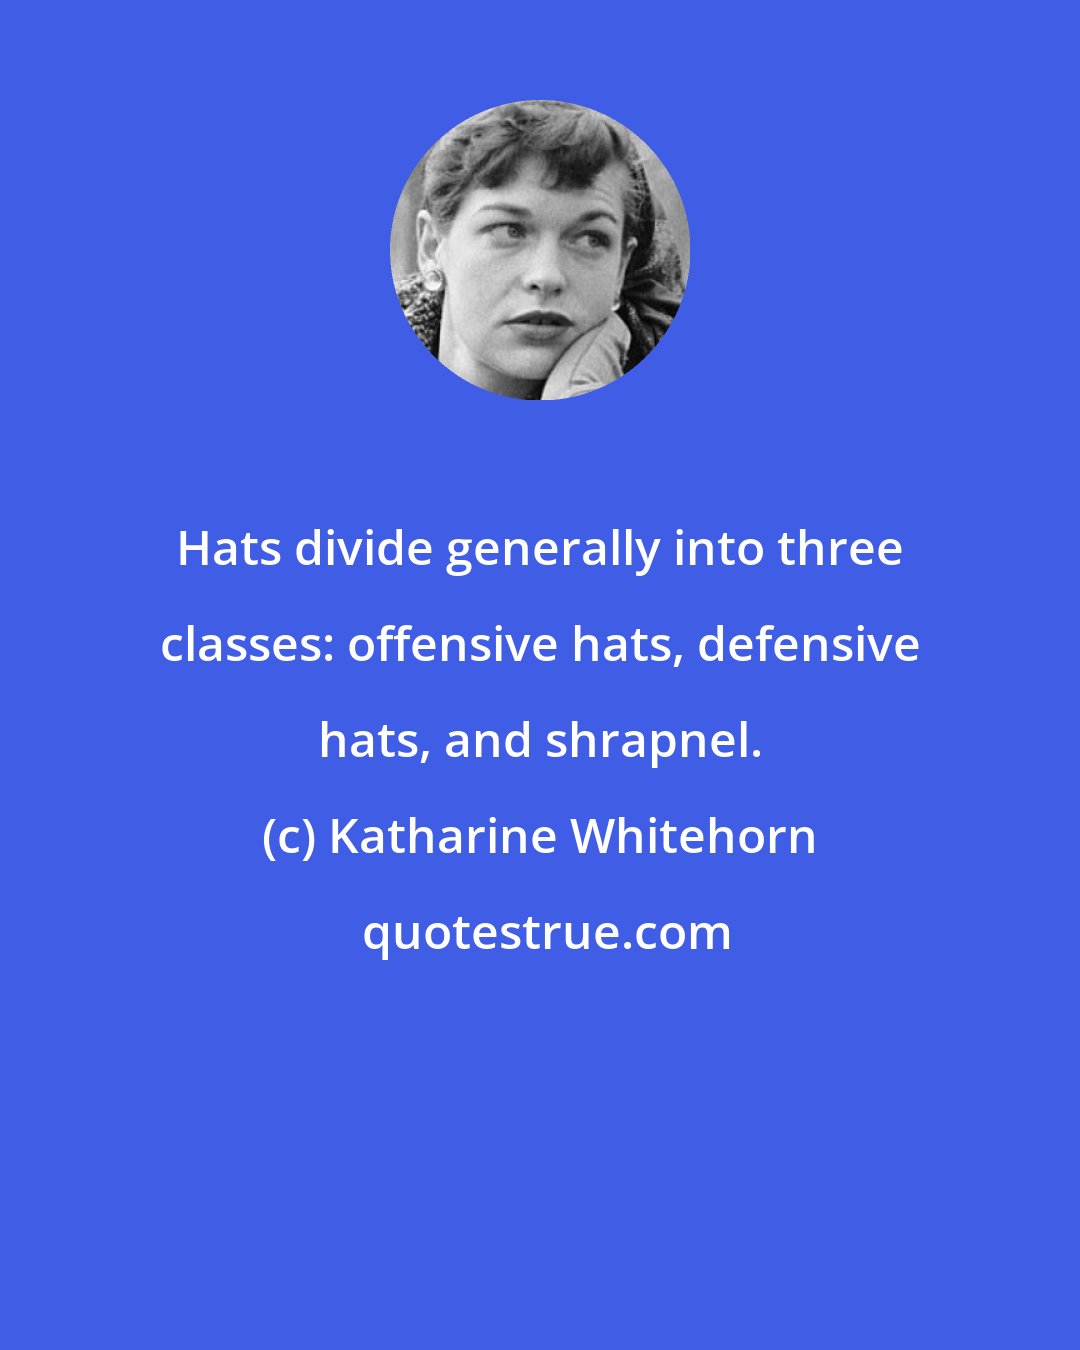 Katharine Whitehorn: Hats divide generally into three classes: offensive hats, defensive hats, and shrapnel.